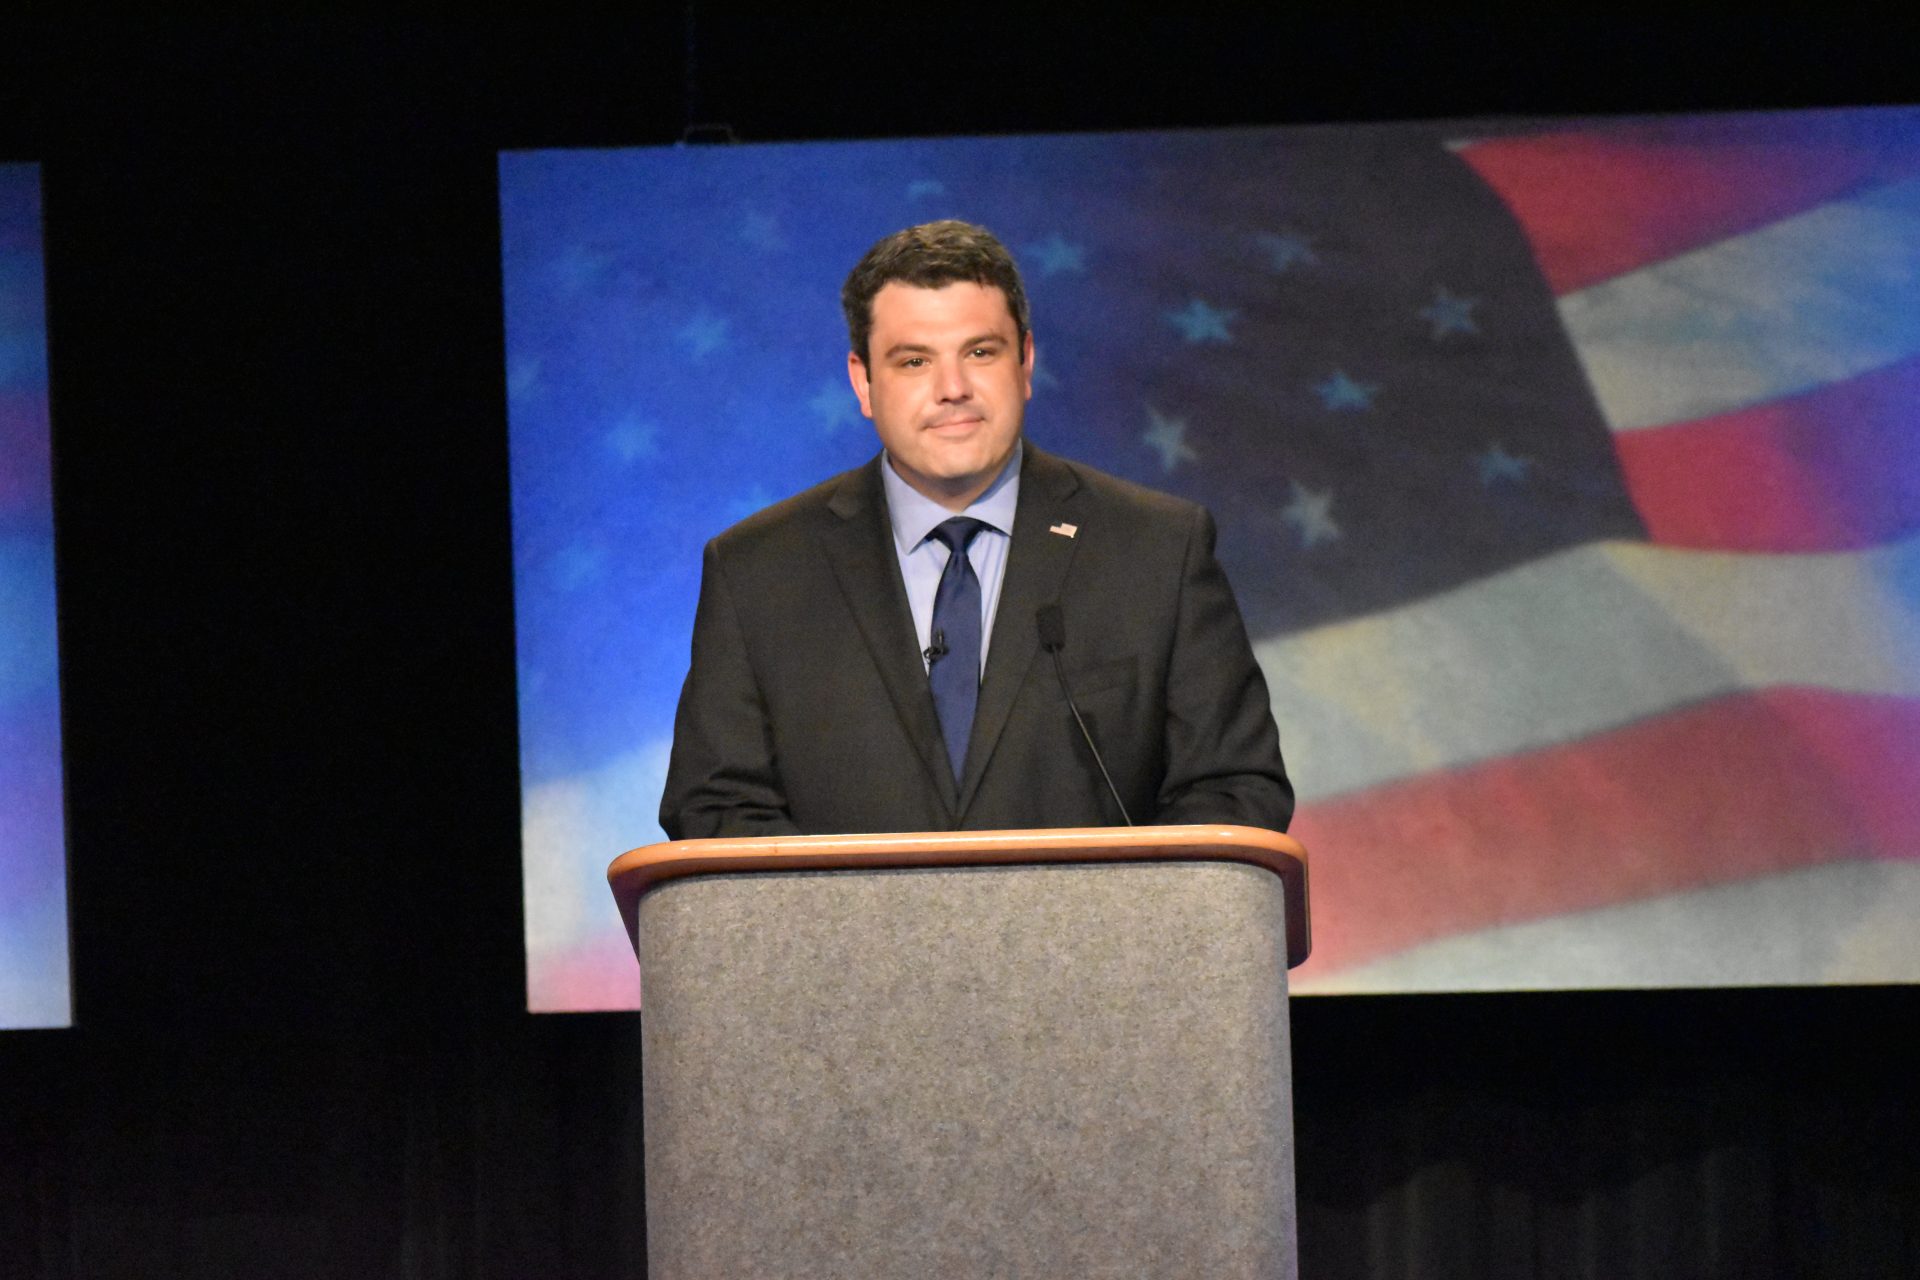 Democrat Marc Friedenberg, seen ahead of a debate on May 2, 2019, is running for Pennsylvania's 12th congressional district.